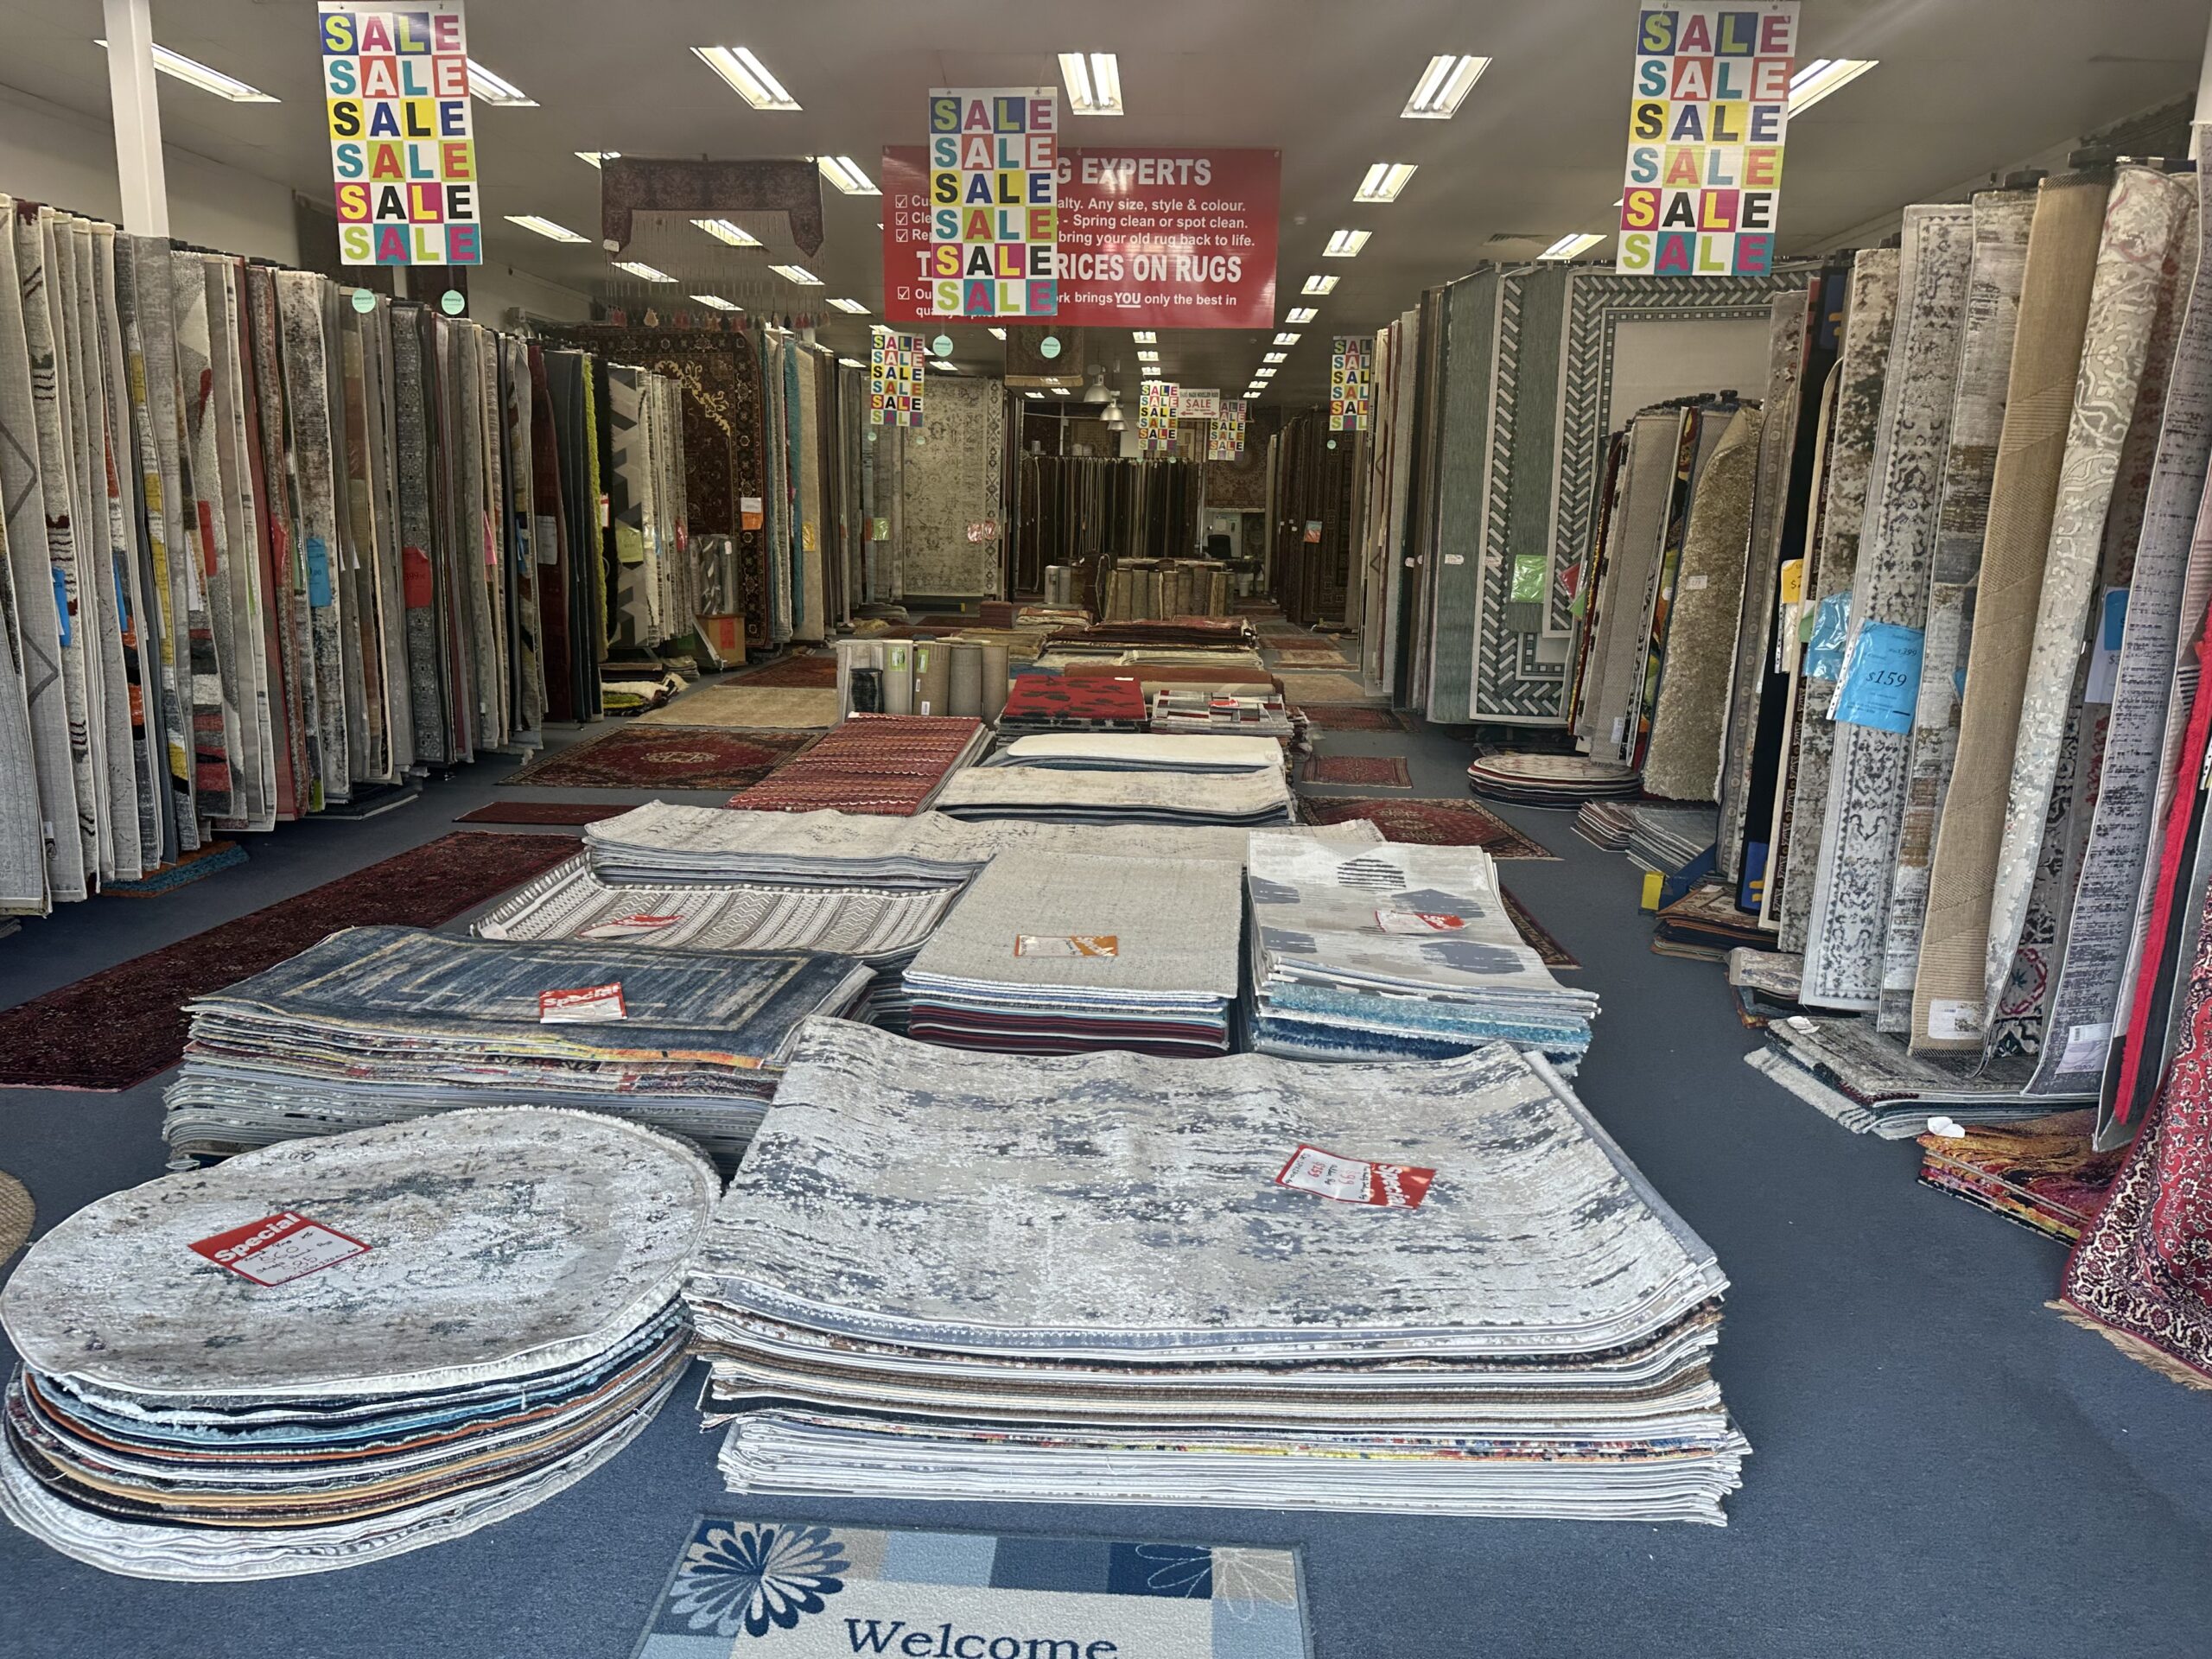 Over 2000 Rugs in Stock